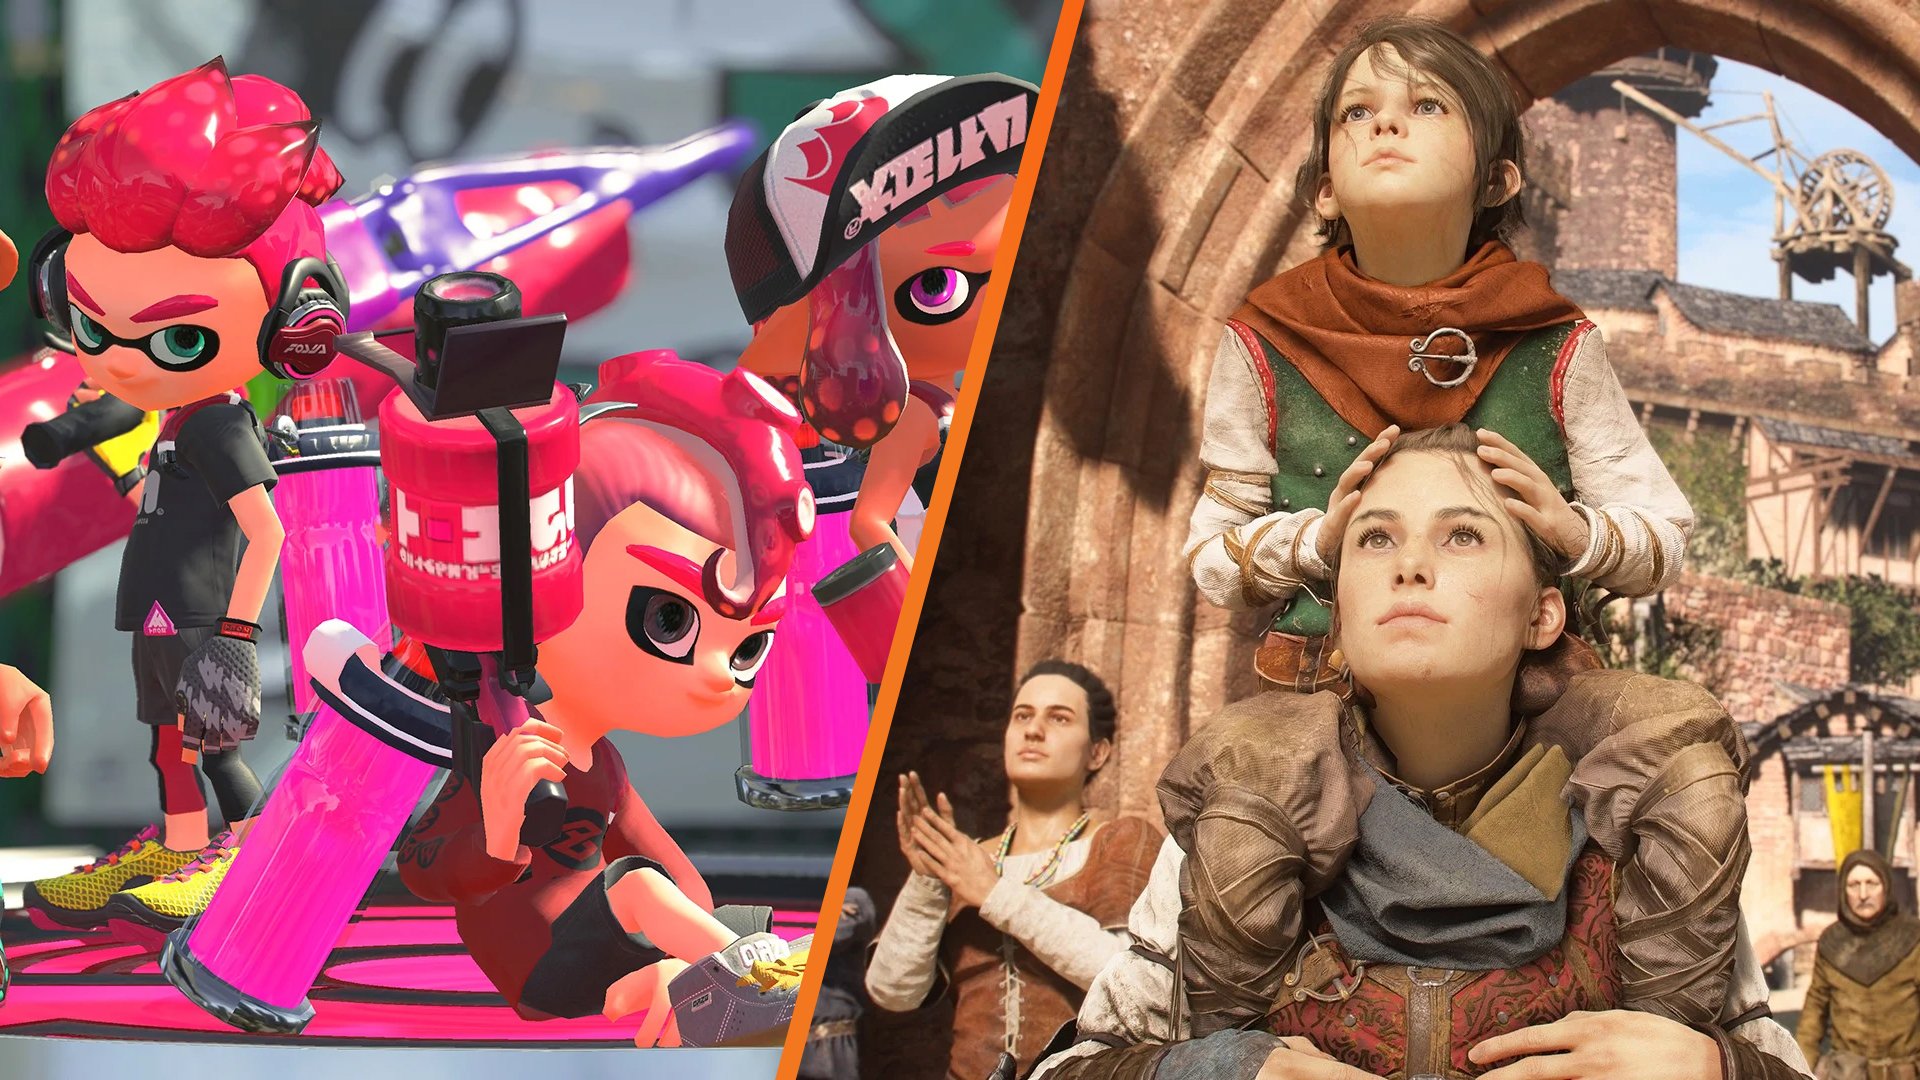 2022 Games: What games are left to release this year?